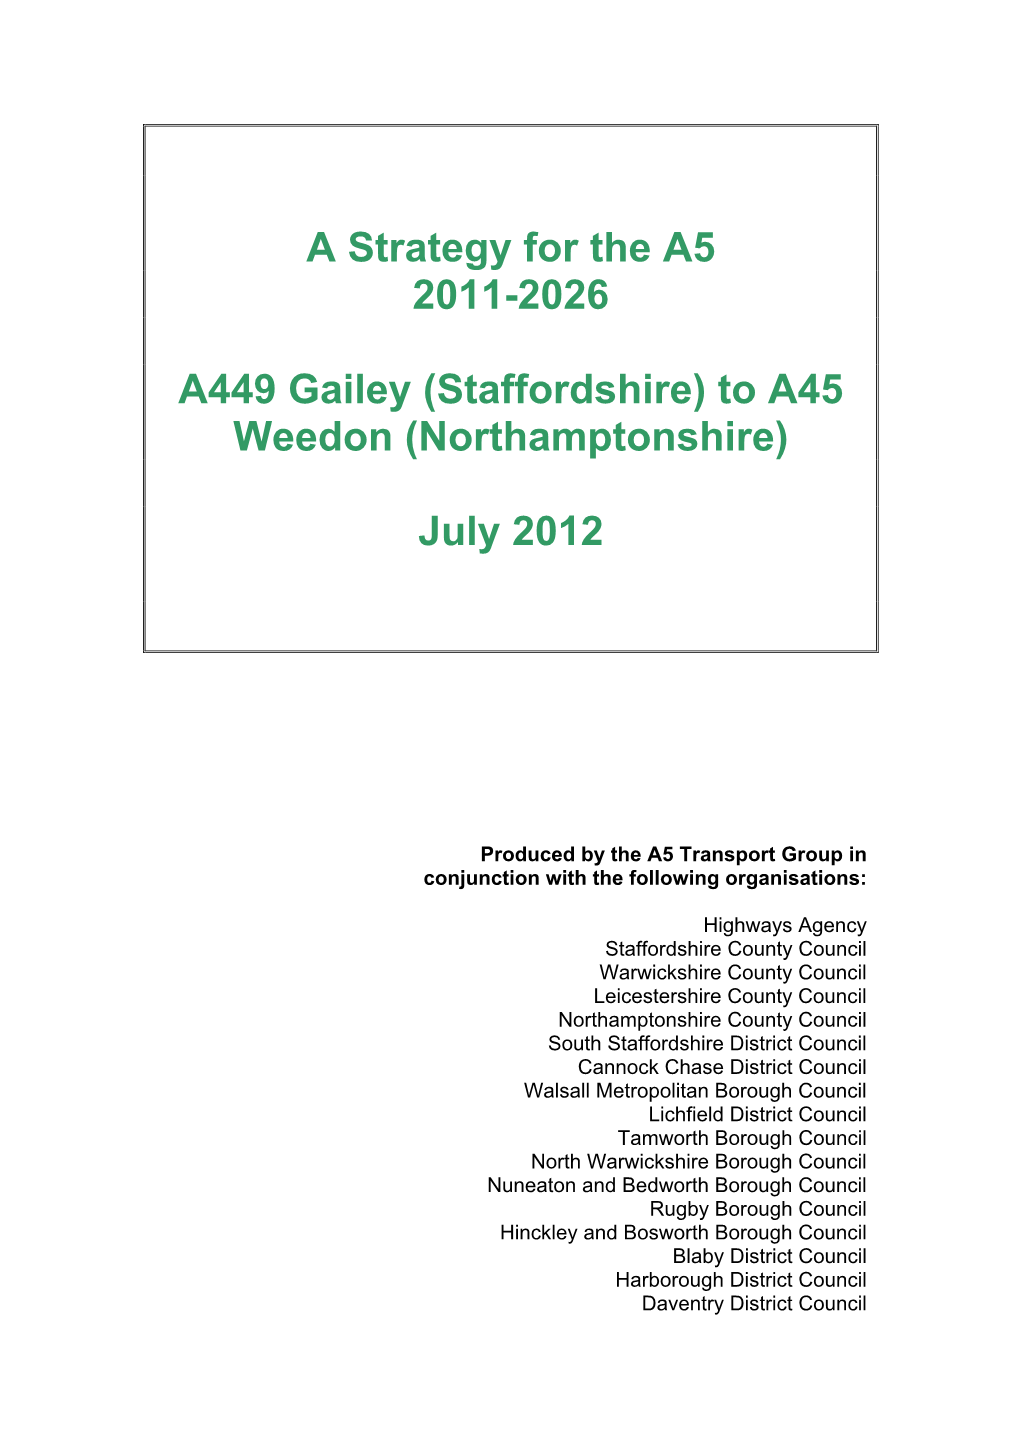 A Strategy for the A5 2011-2026 A449 Gailey (Staffordshire) to A45 Weedon